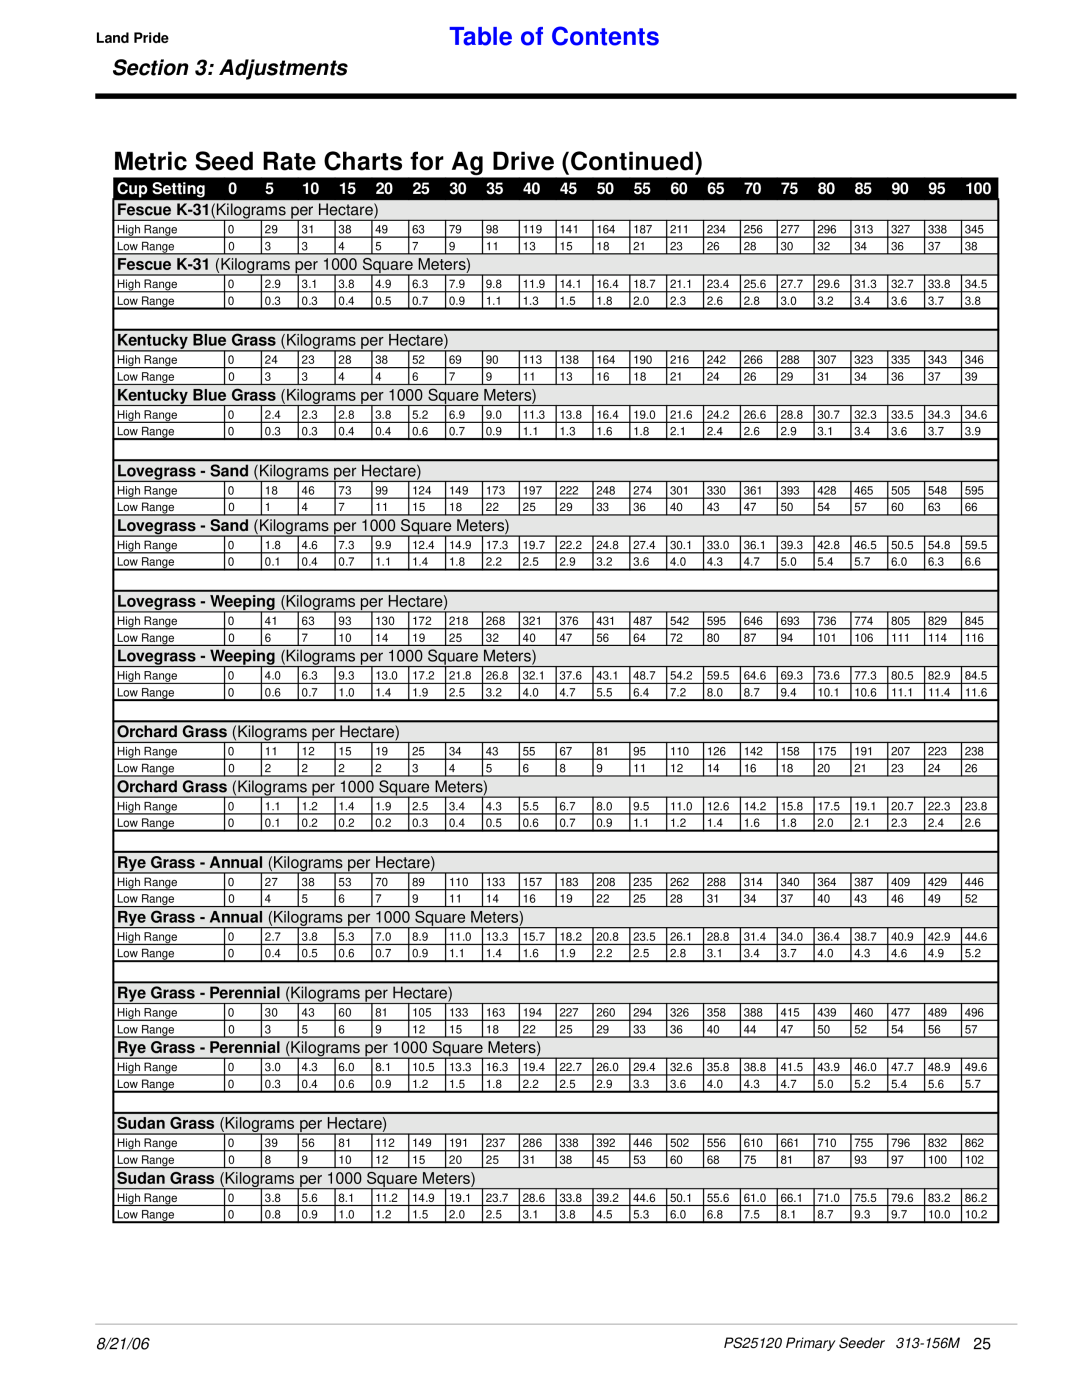 Land Pride PS25120 manual Metric Seed Rate Charts for Ag Drive Continued, Table of Contents, Adjustments, Fescue K-31 